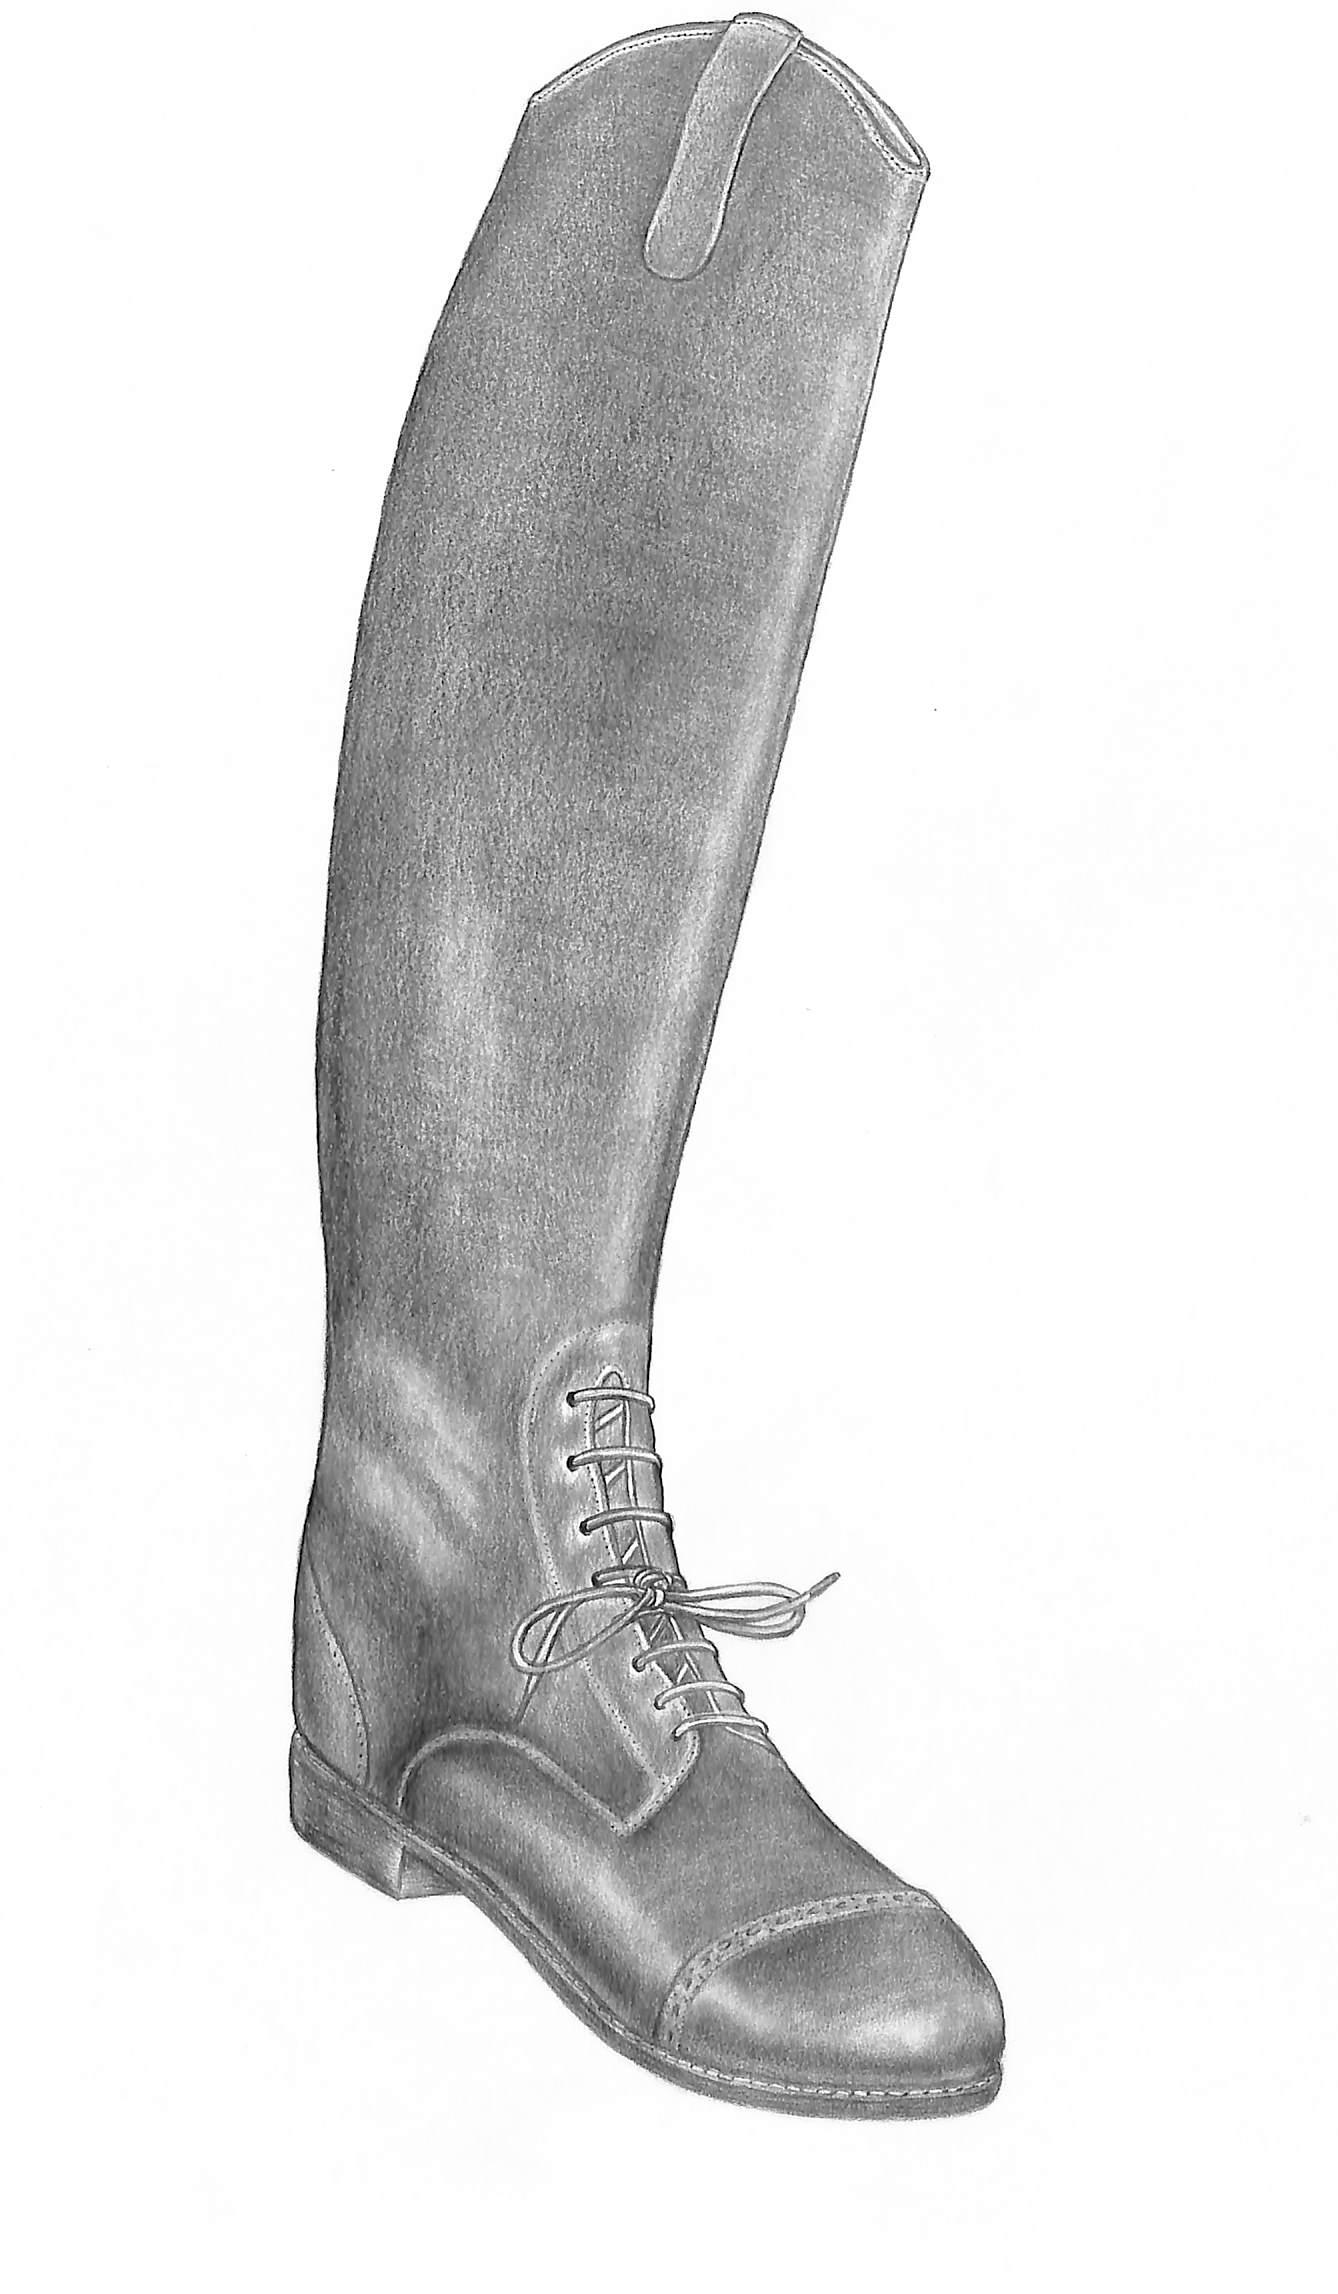 Ariat Brown Ladies Field Boot Graphite Drawing - Art by Unknown